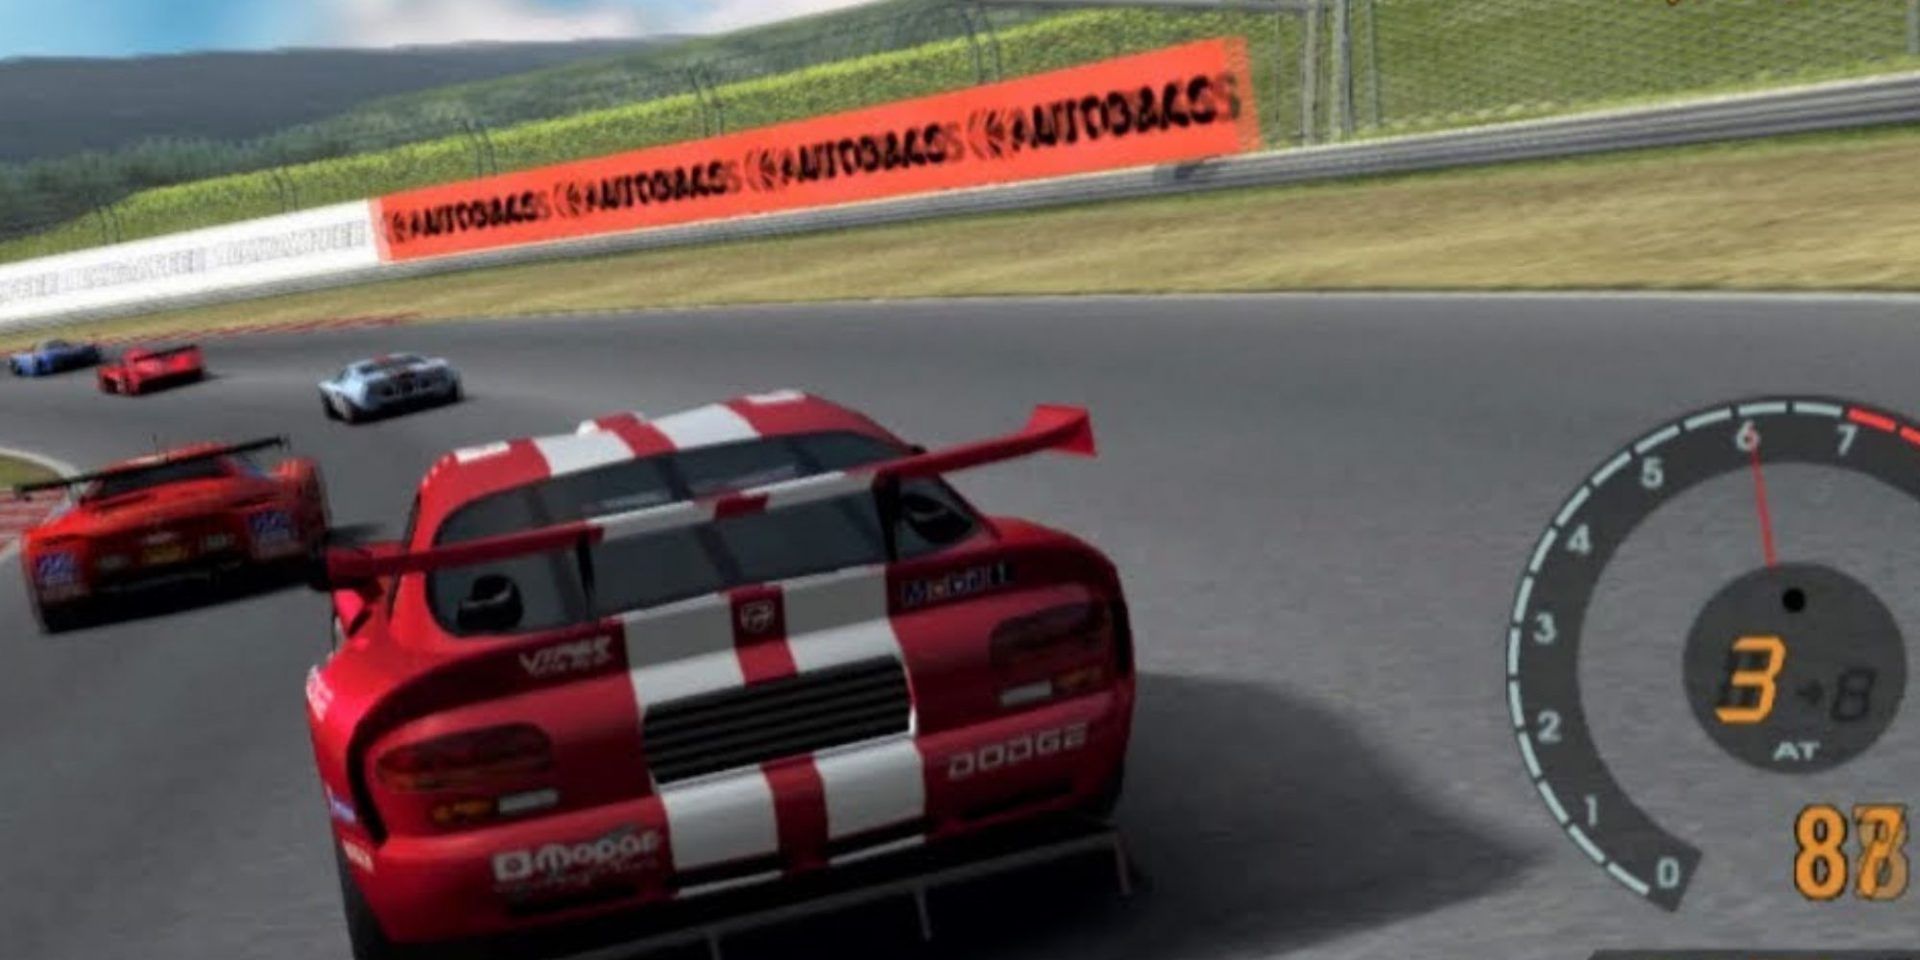 A Viper goes racing around a turn in third gear.